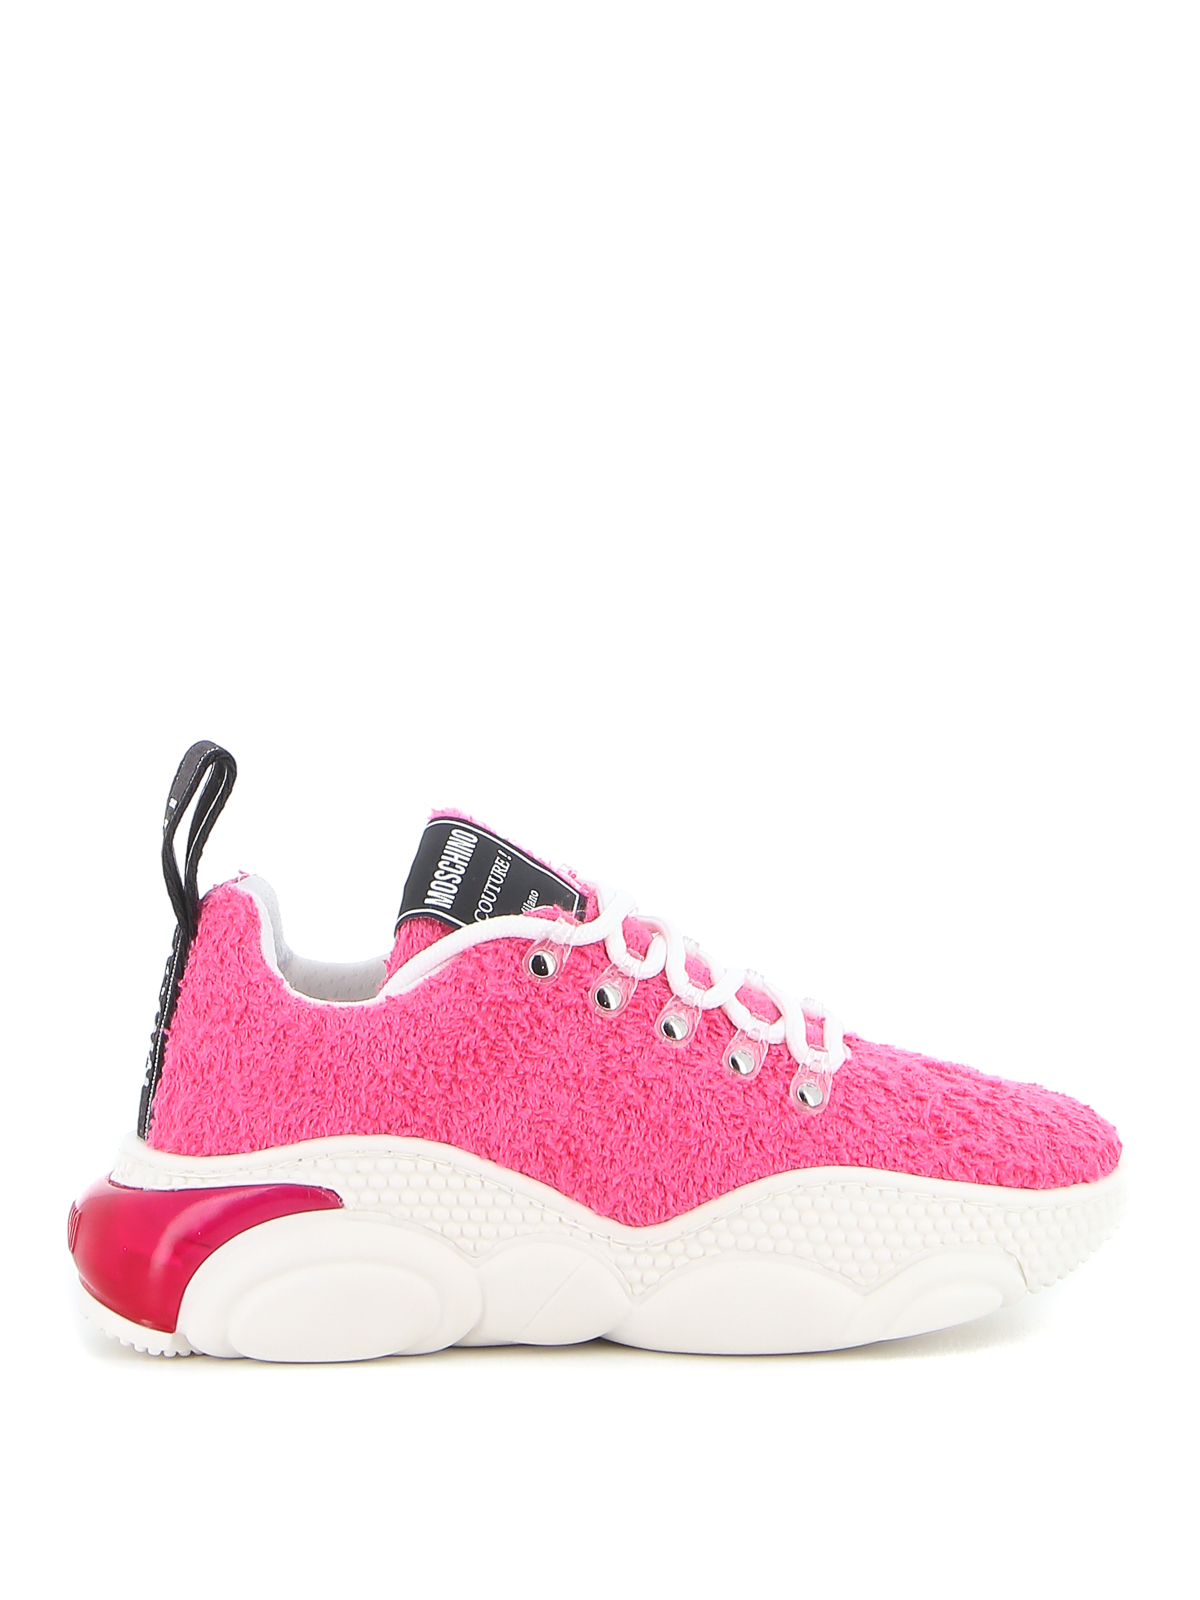 Trainers Moschino - Teddy Bubble sneakers - MA15553G1EM90604 | iKRIX.com